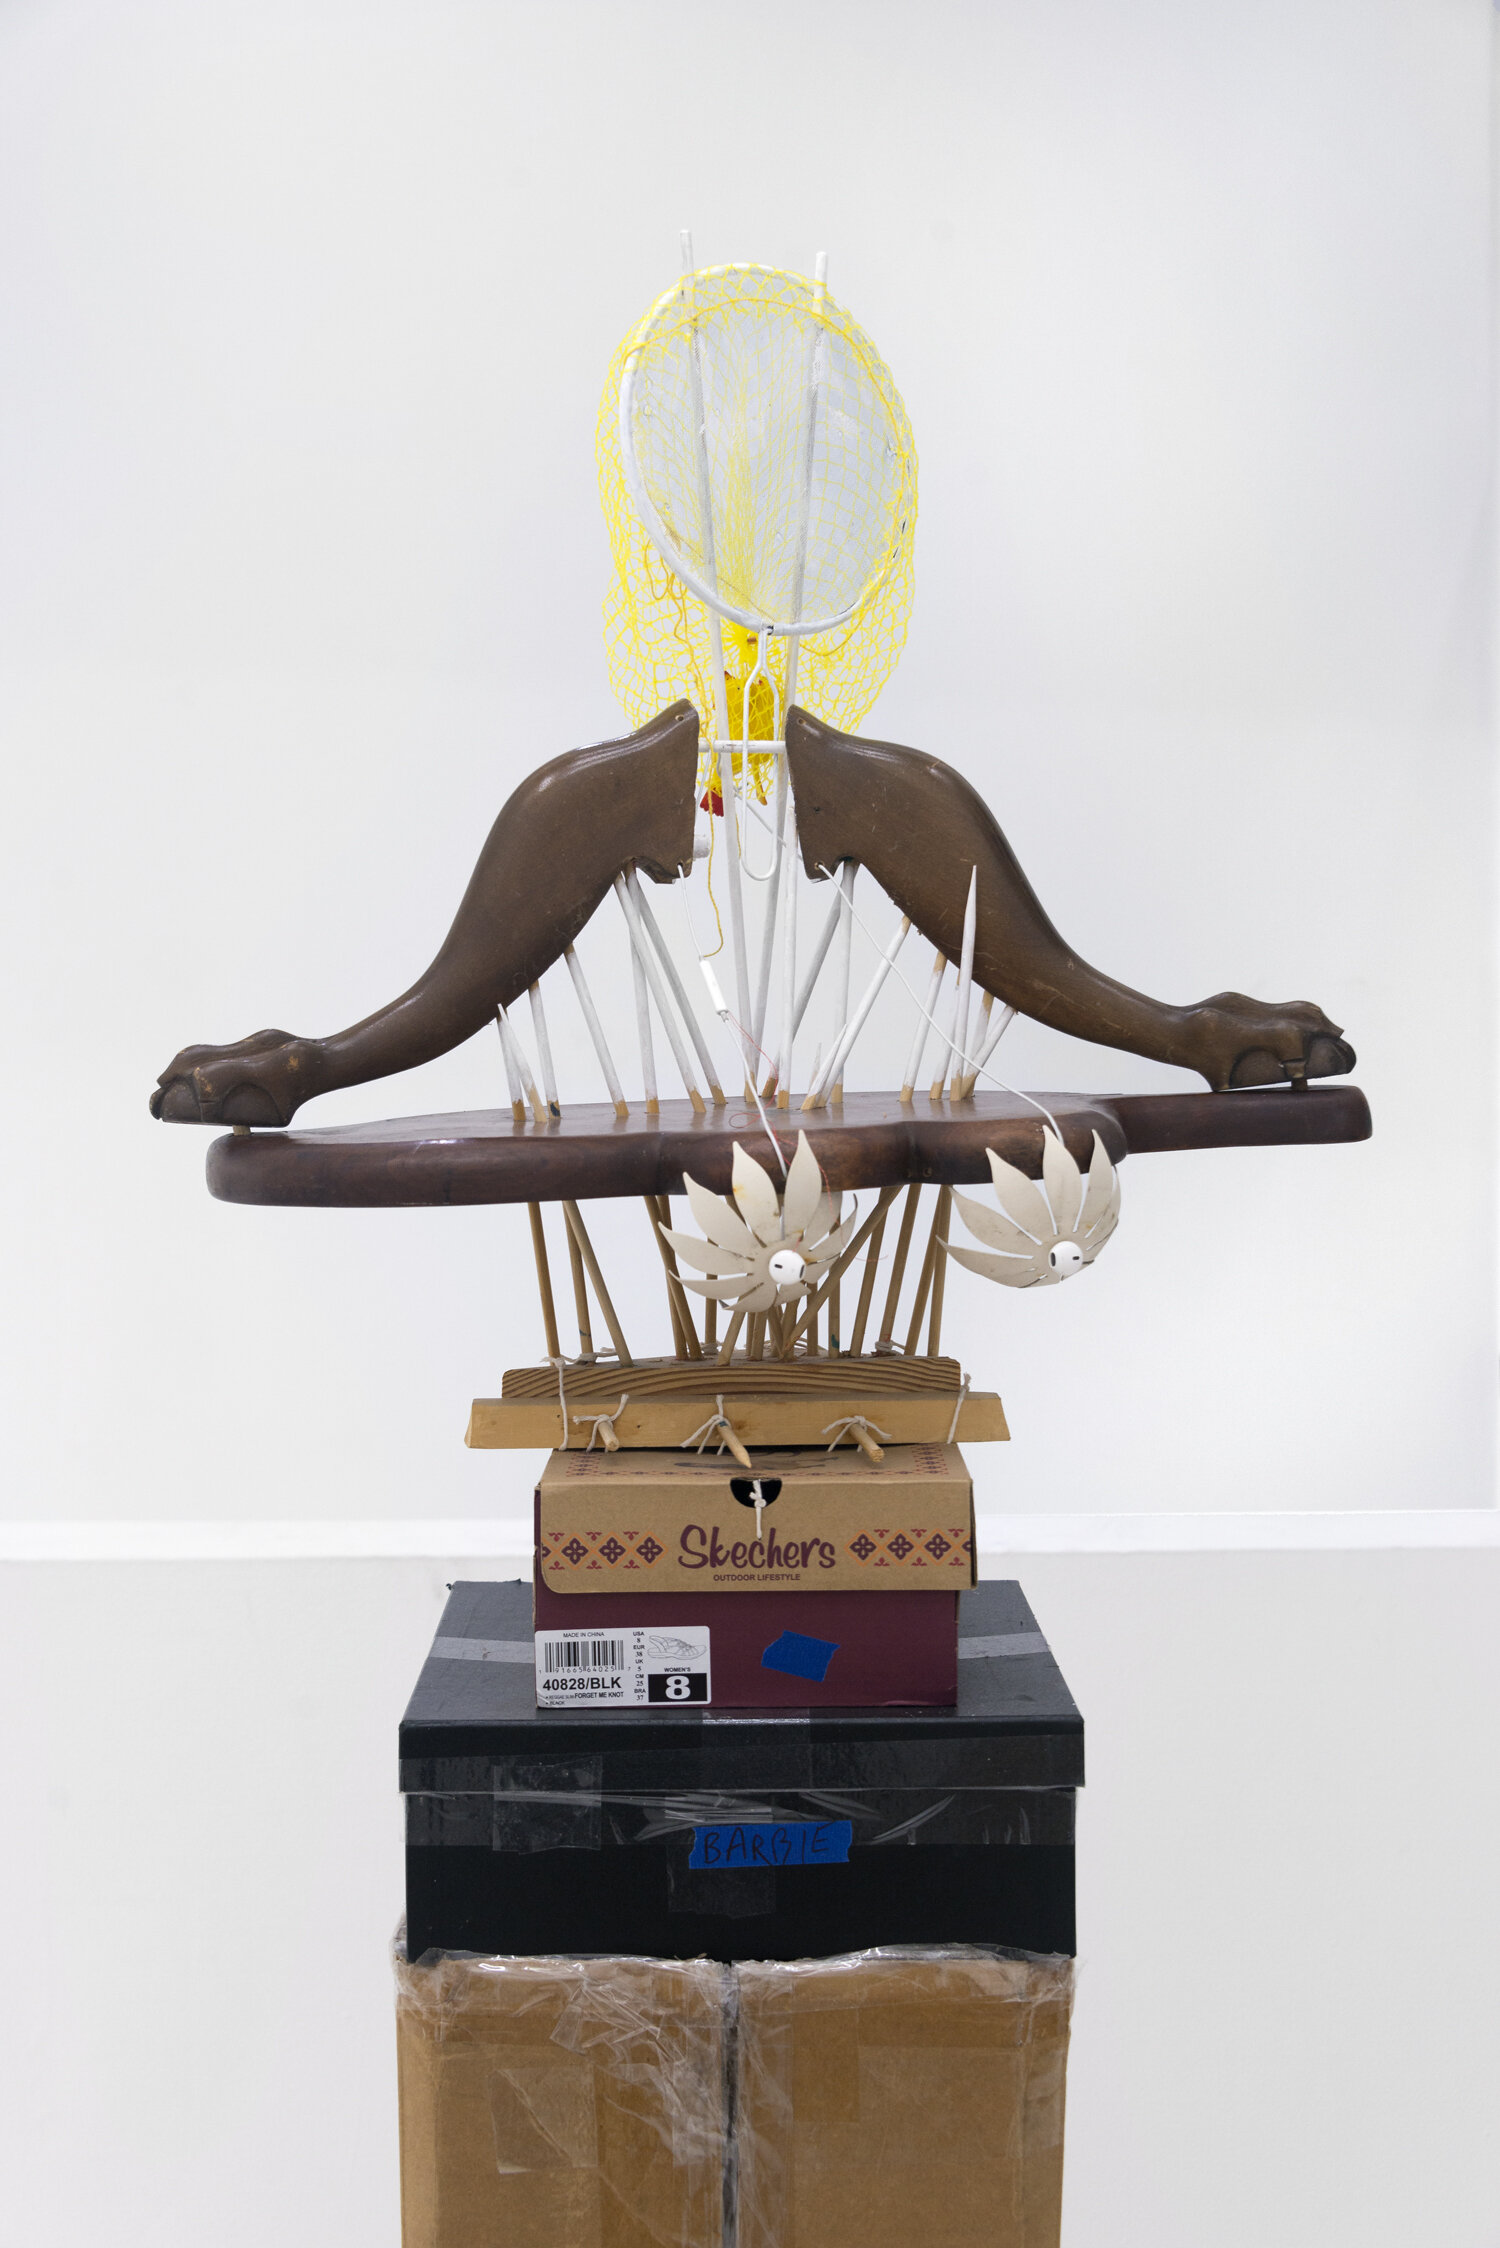   Bertha , 2019, Wood, metal, bamboo, plastic, rubber, acrylic paint, cotton thread pedestal: cardboard, cotton twine 72 x 24 x 12 in (bust only 24 x 24 x 11 in)  